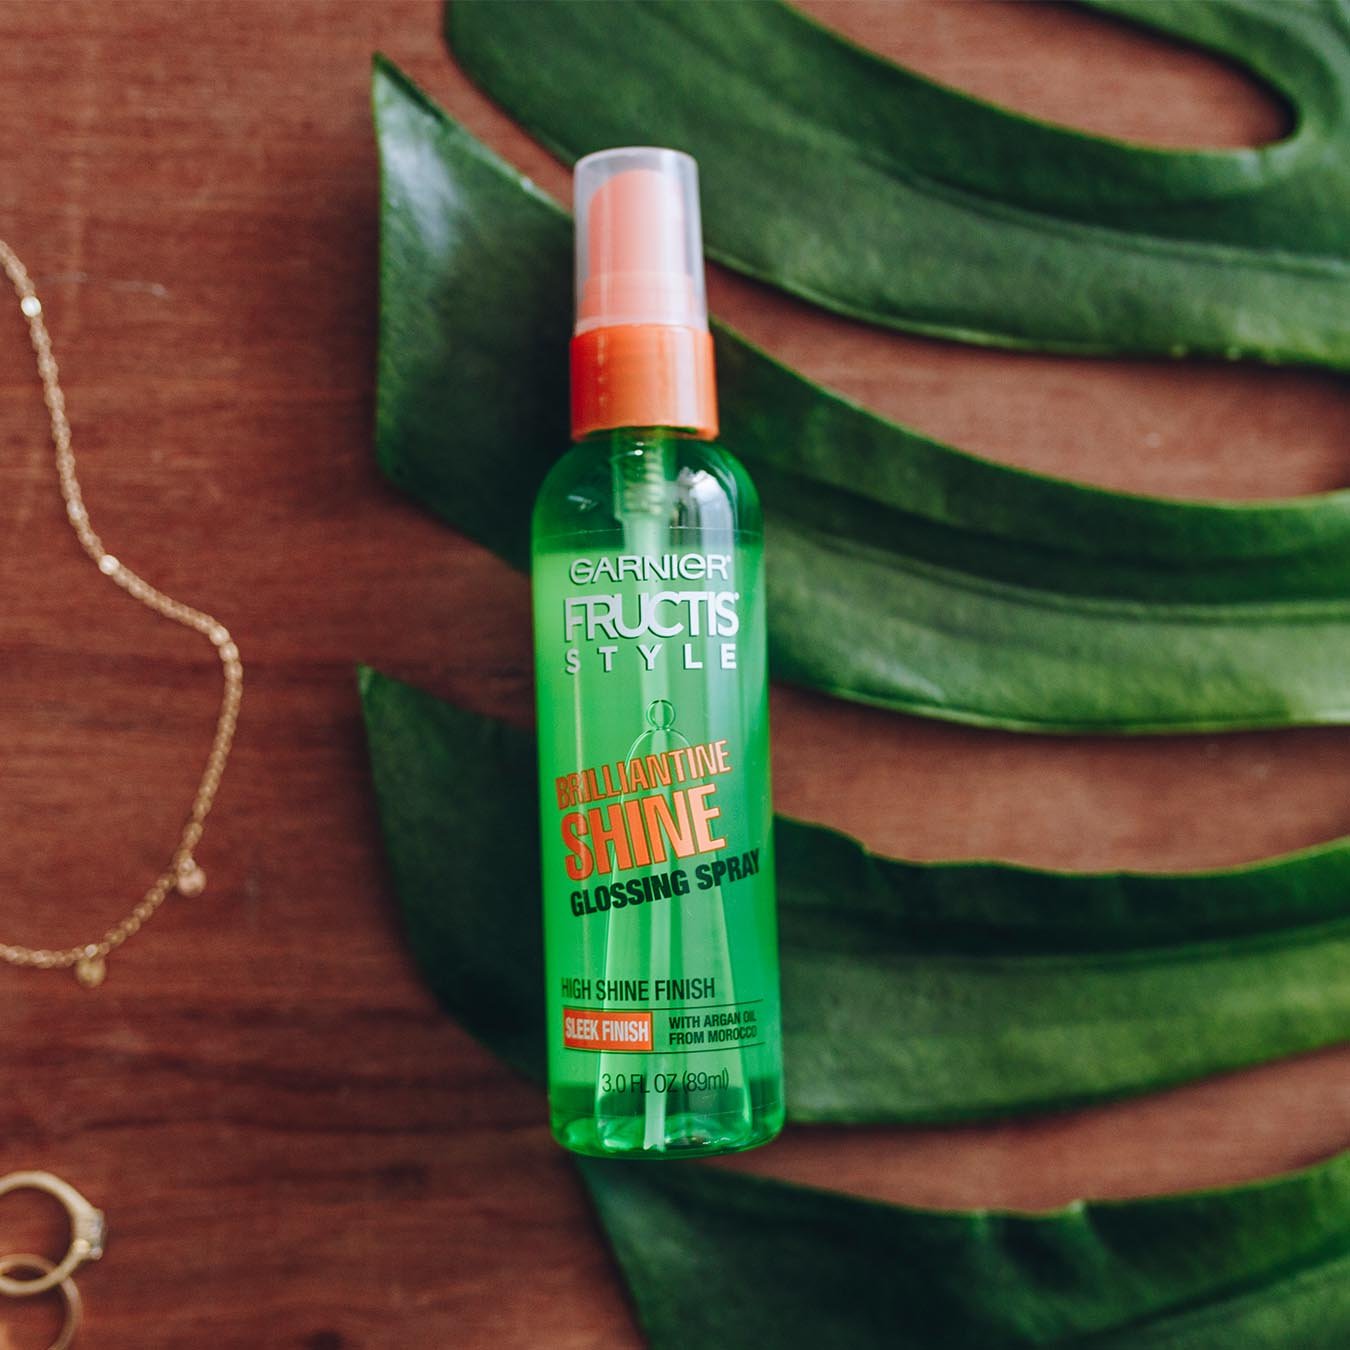 Garnier Fructis Style Brilliantine Shine Glossing Spray on a palm frond on a warm wooden table next to a gold bracelet and two gold rings.